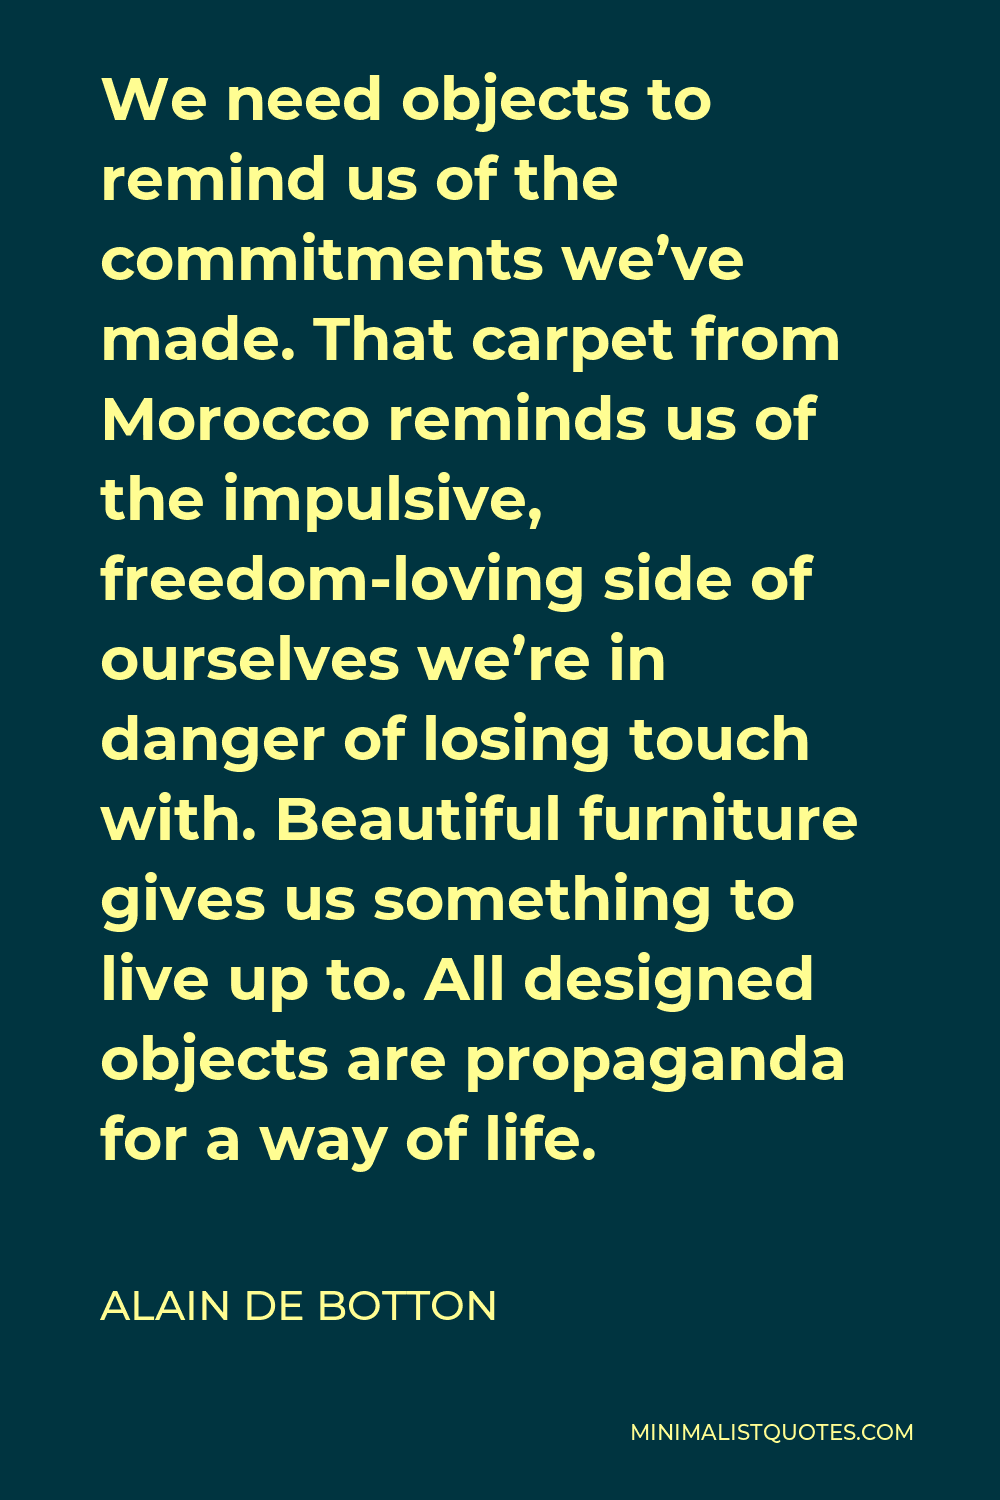 Alain de Botton Quote - We need objects to remind us of the commitments we’ve made. That carpet from Morocco reminds us of the impulsive, freedom-loving side of ourselves we’re in danger of losing touch with. Beautiful furniture gives us something to live up to. All designed objects are propaganda for a way of life.